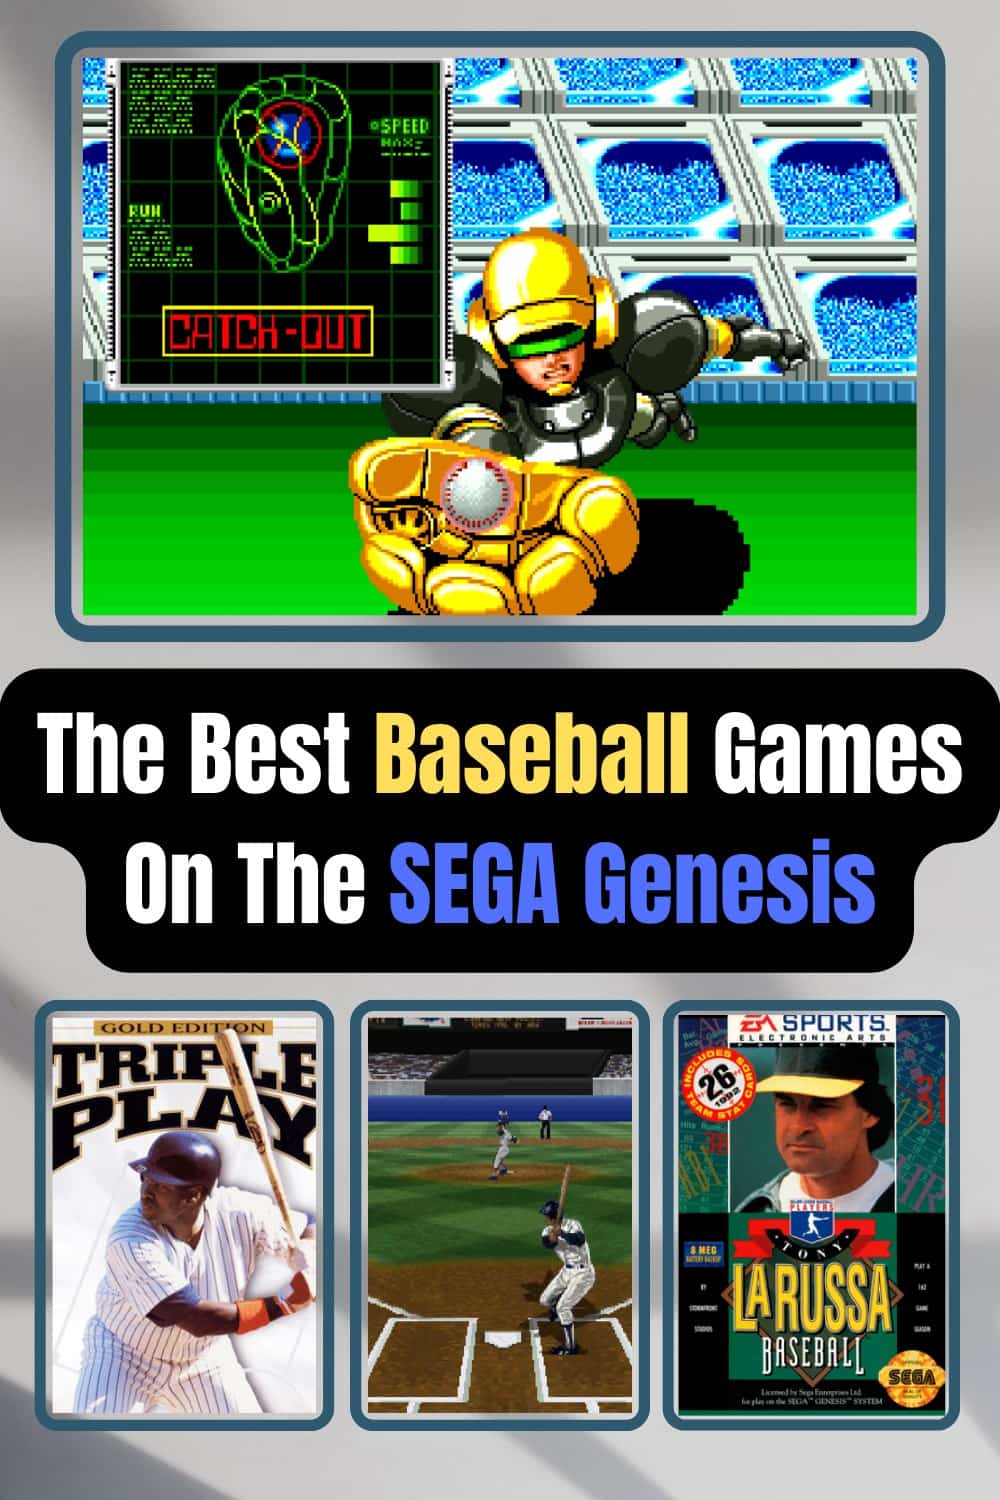 What Is The Best Baseball Game For The Genesis?